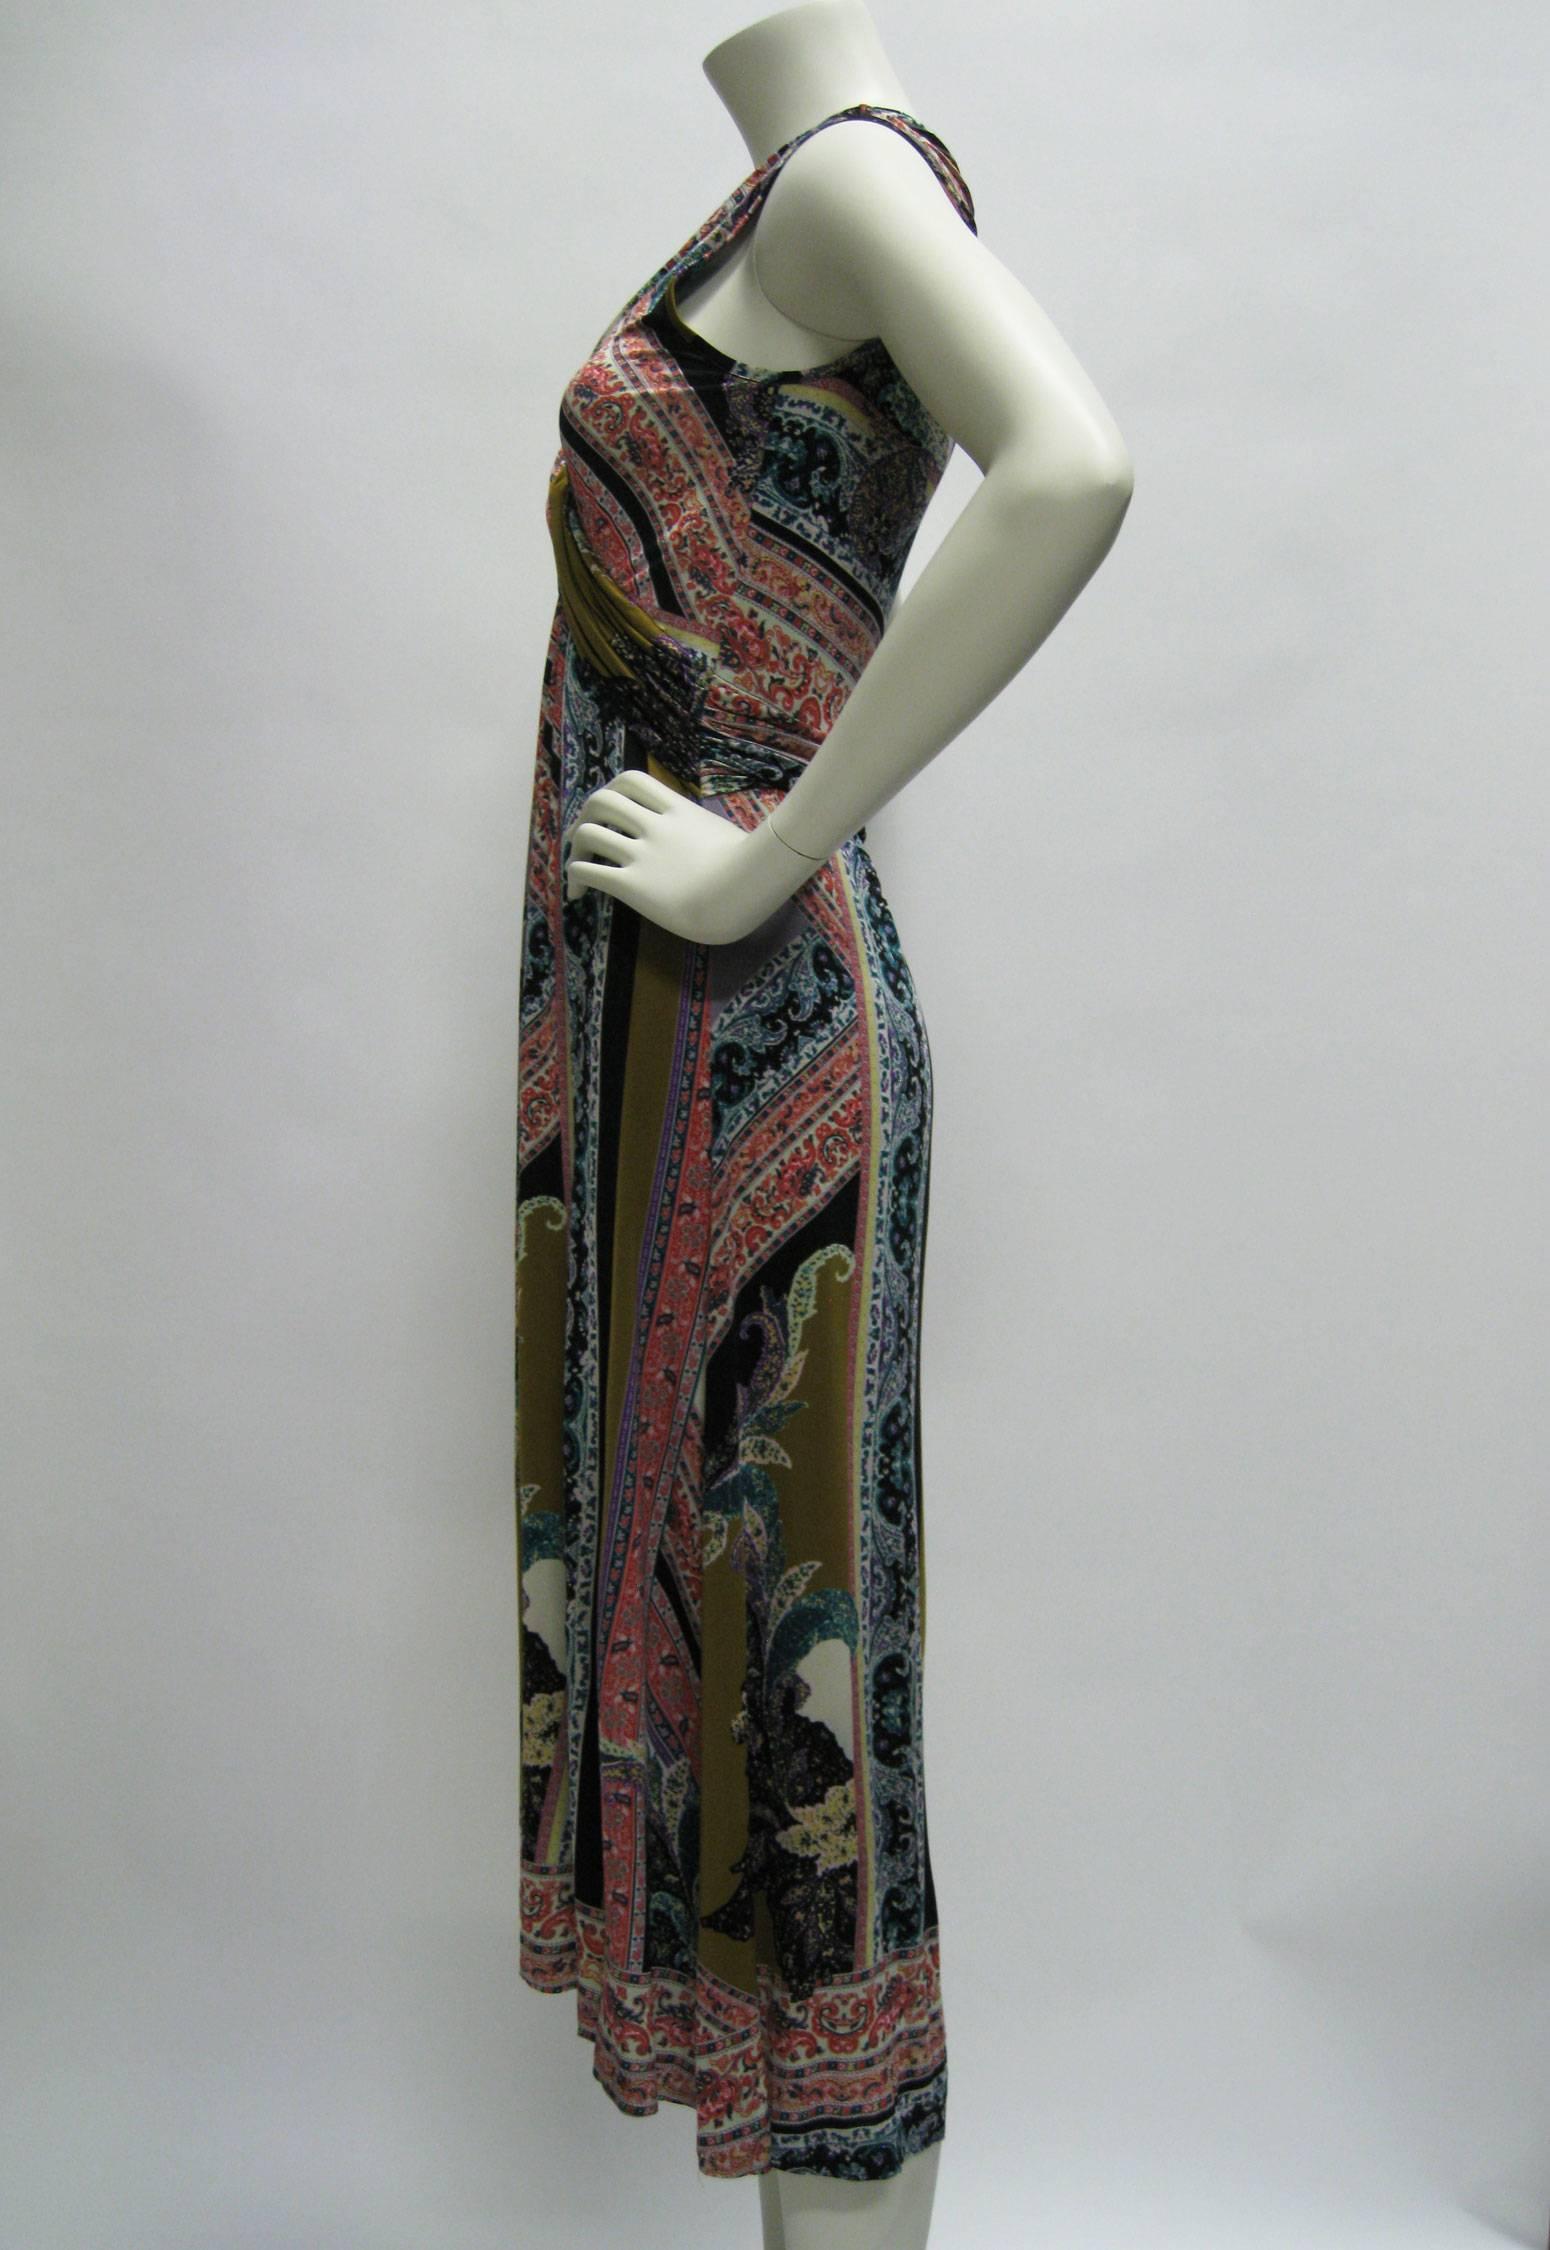 Stretchy Etro printed dress.
Slinky lightweight fabric.
Twisted empire waist.
Deep V neck.
Detailed floral motif with bold swatches of color.
Long loose skirt.
Slightly longer in back.
Tagged a size 44.
Note: Dress is very stretchy. 